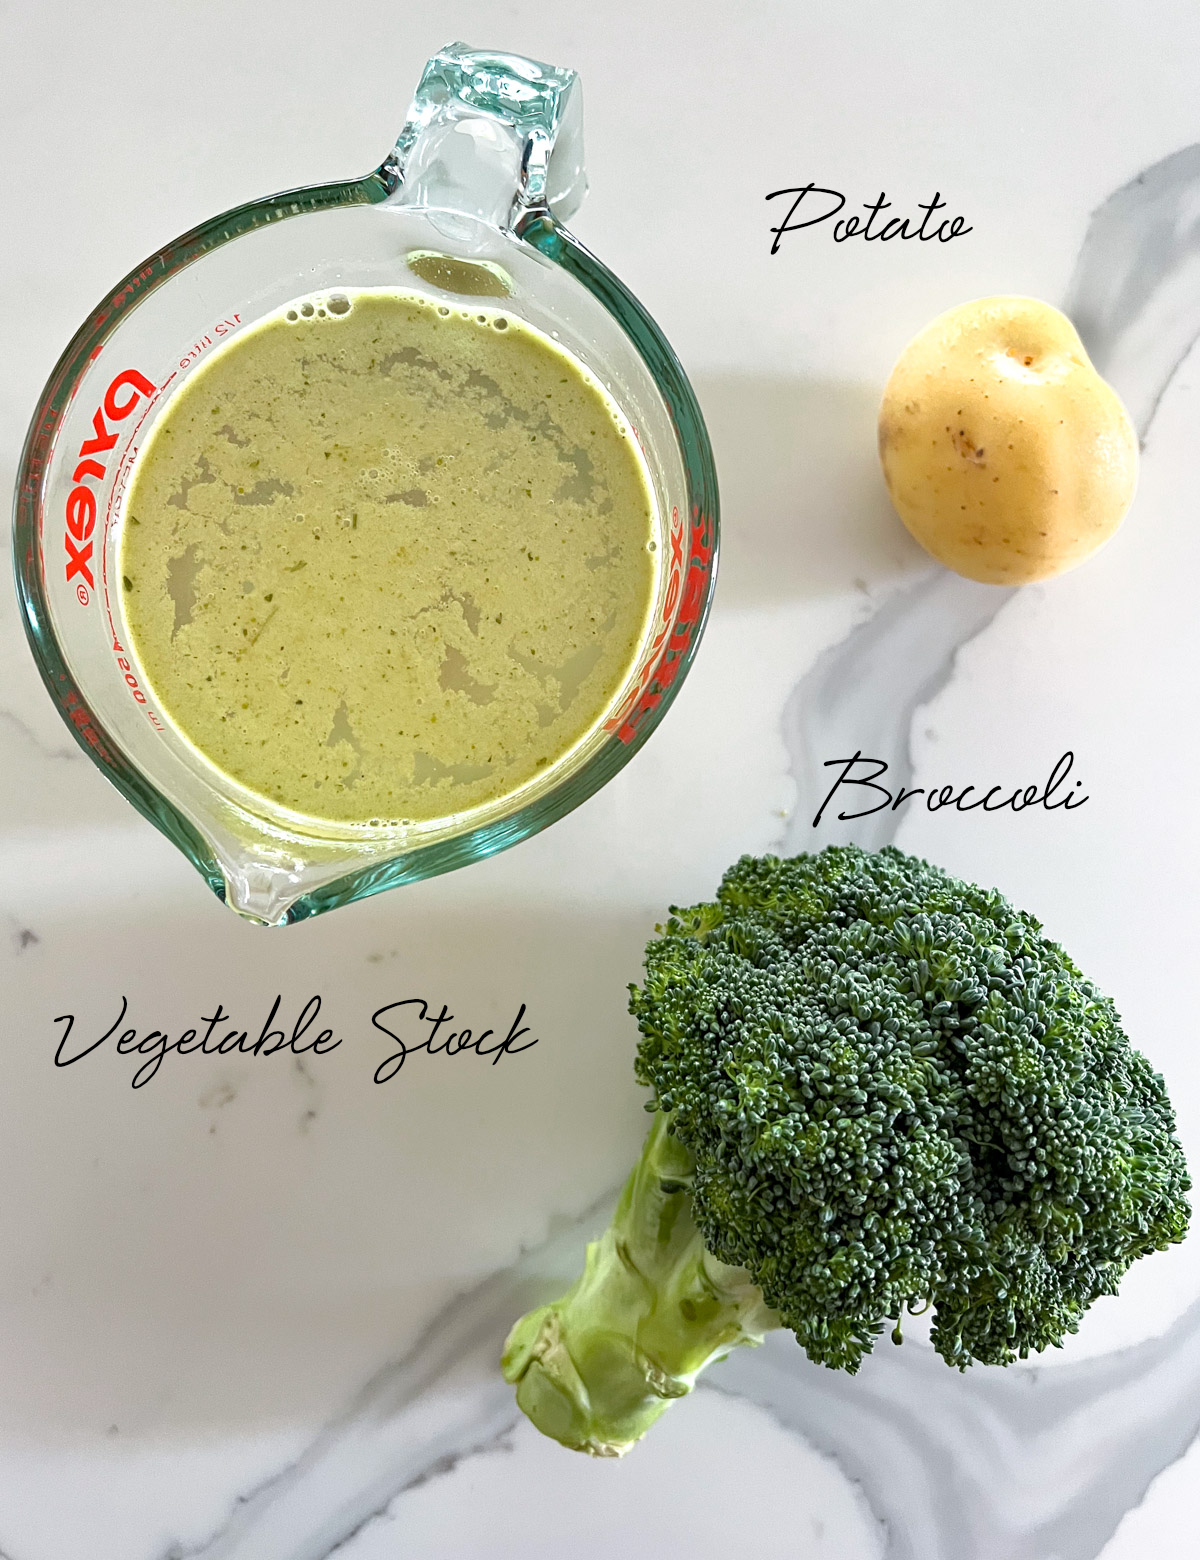 a broccoli, potato and a cup of vegetable stock on a white bench